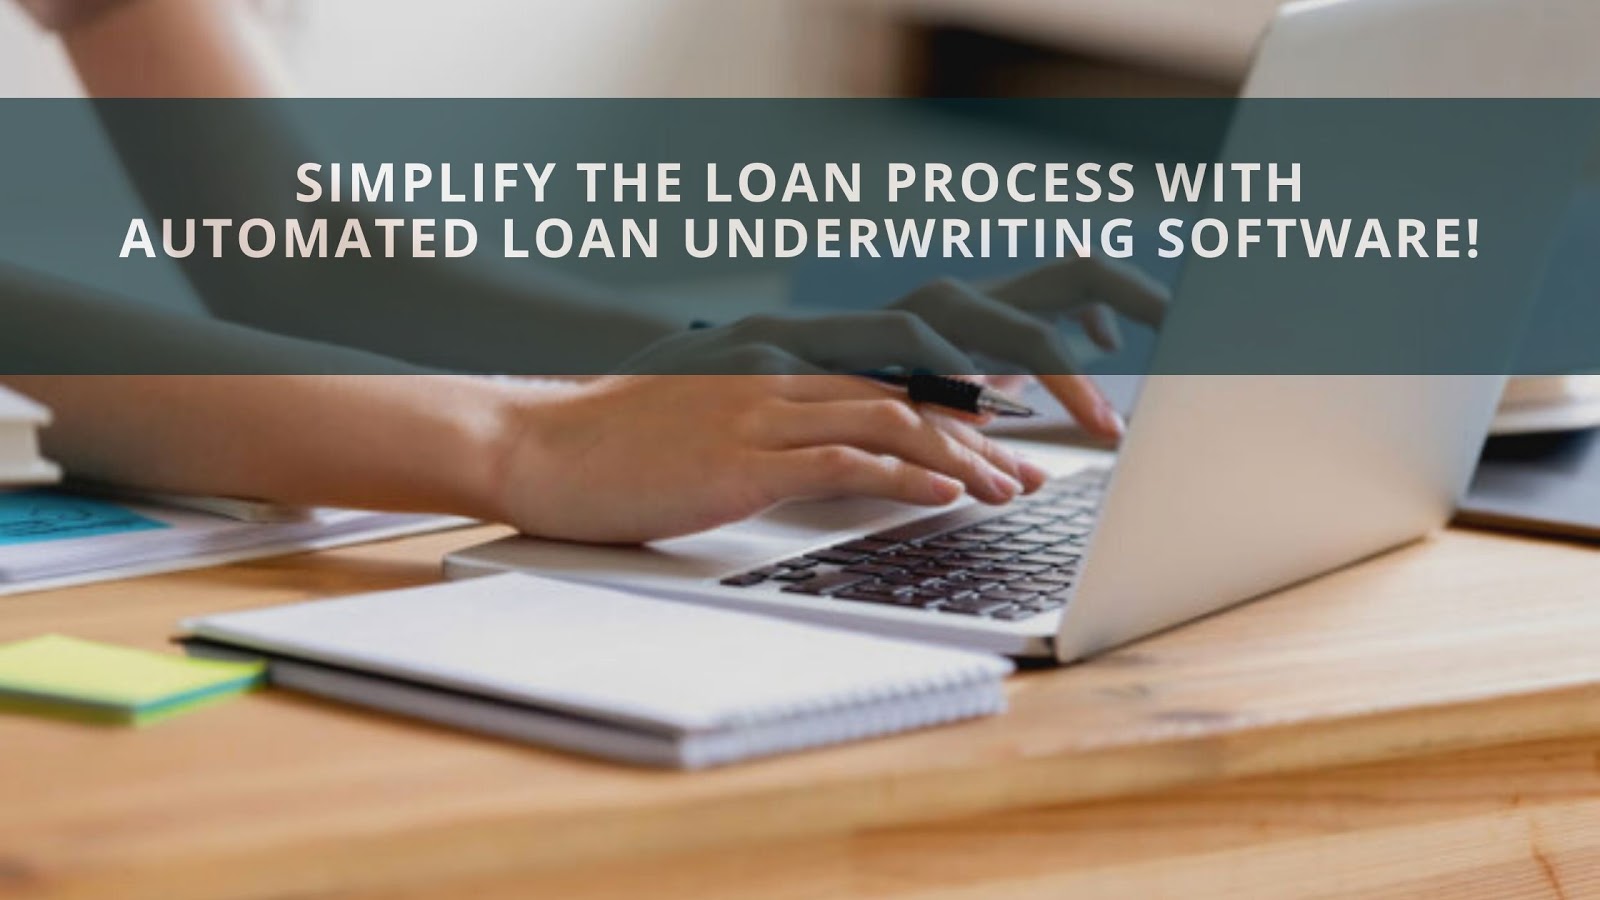 Simplify the loan process with automated Loan Underwriting Software